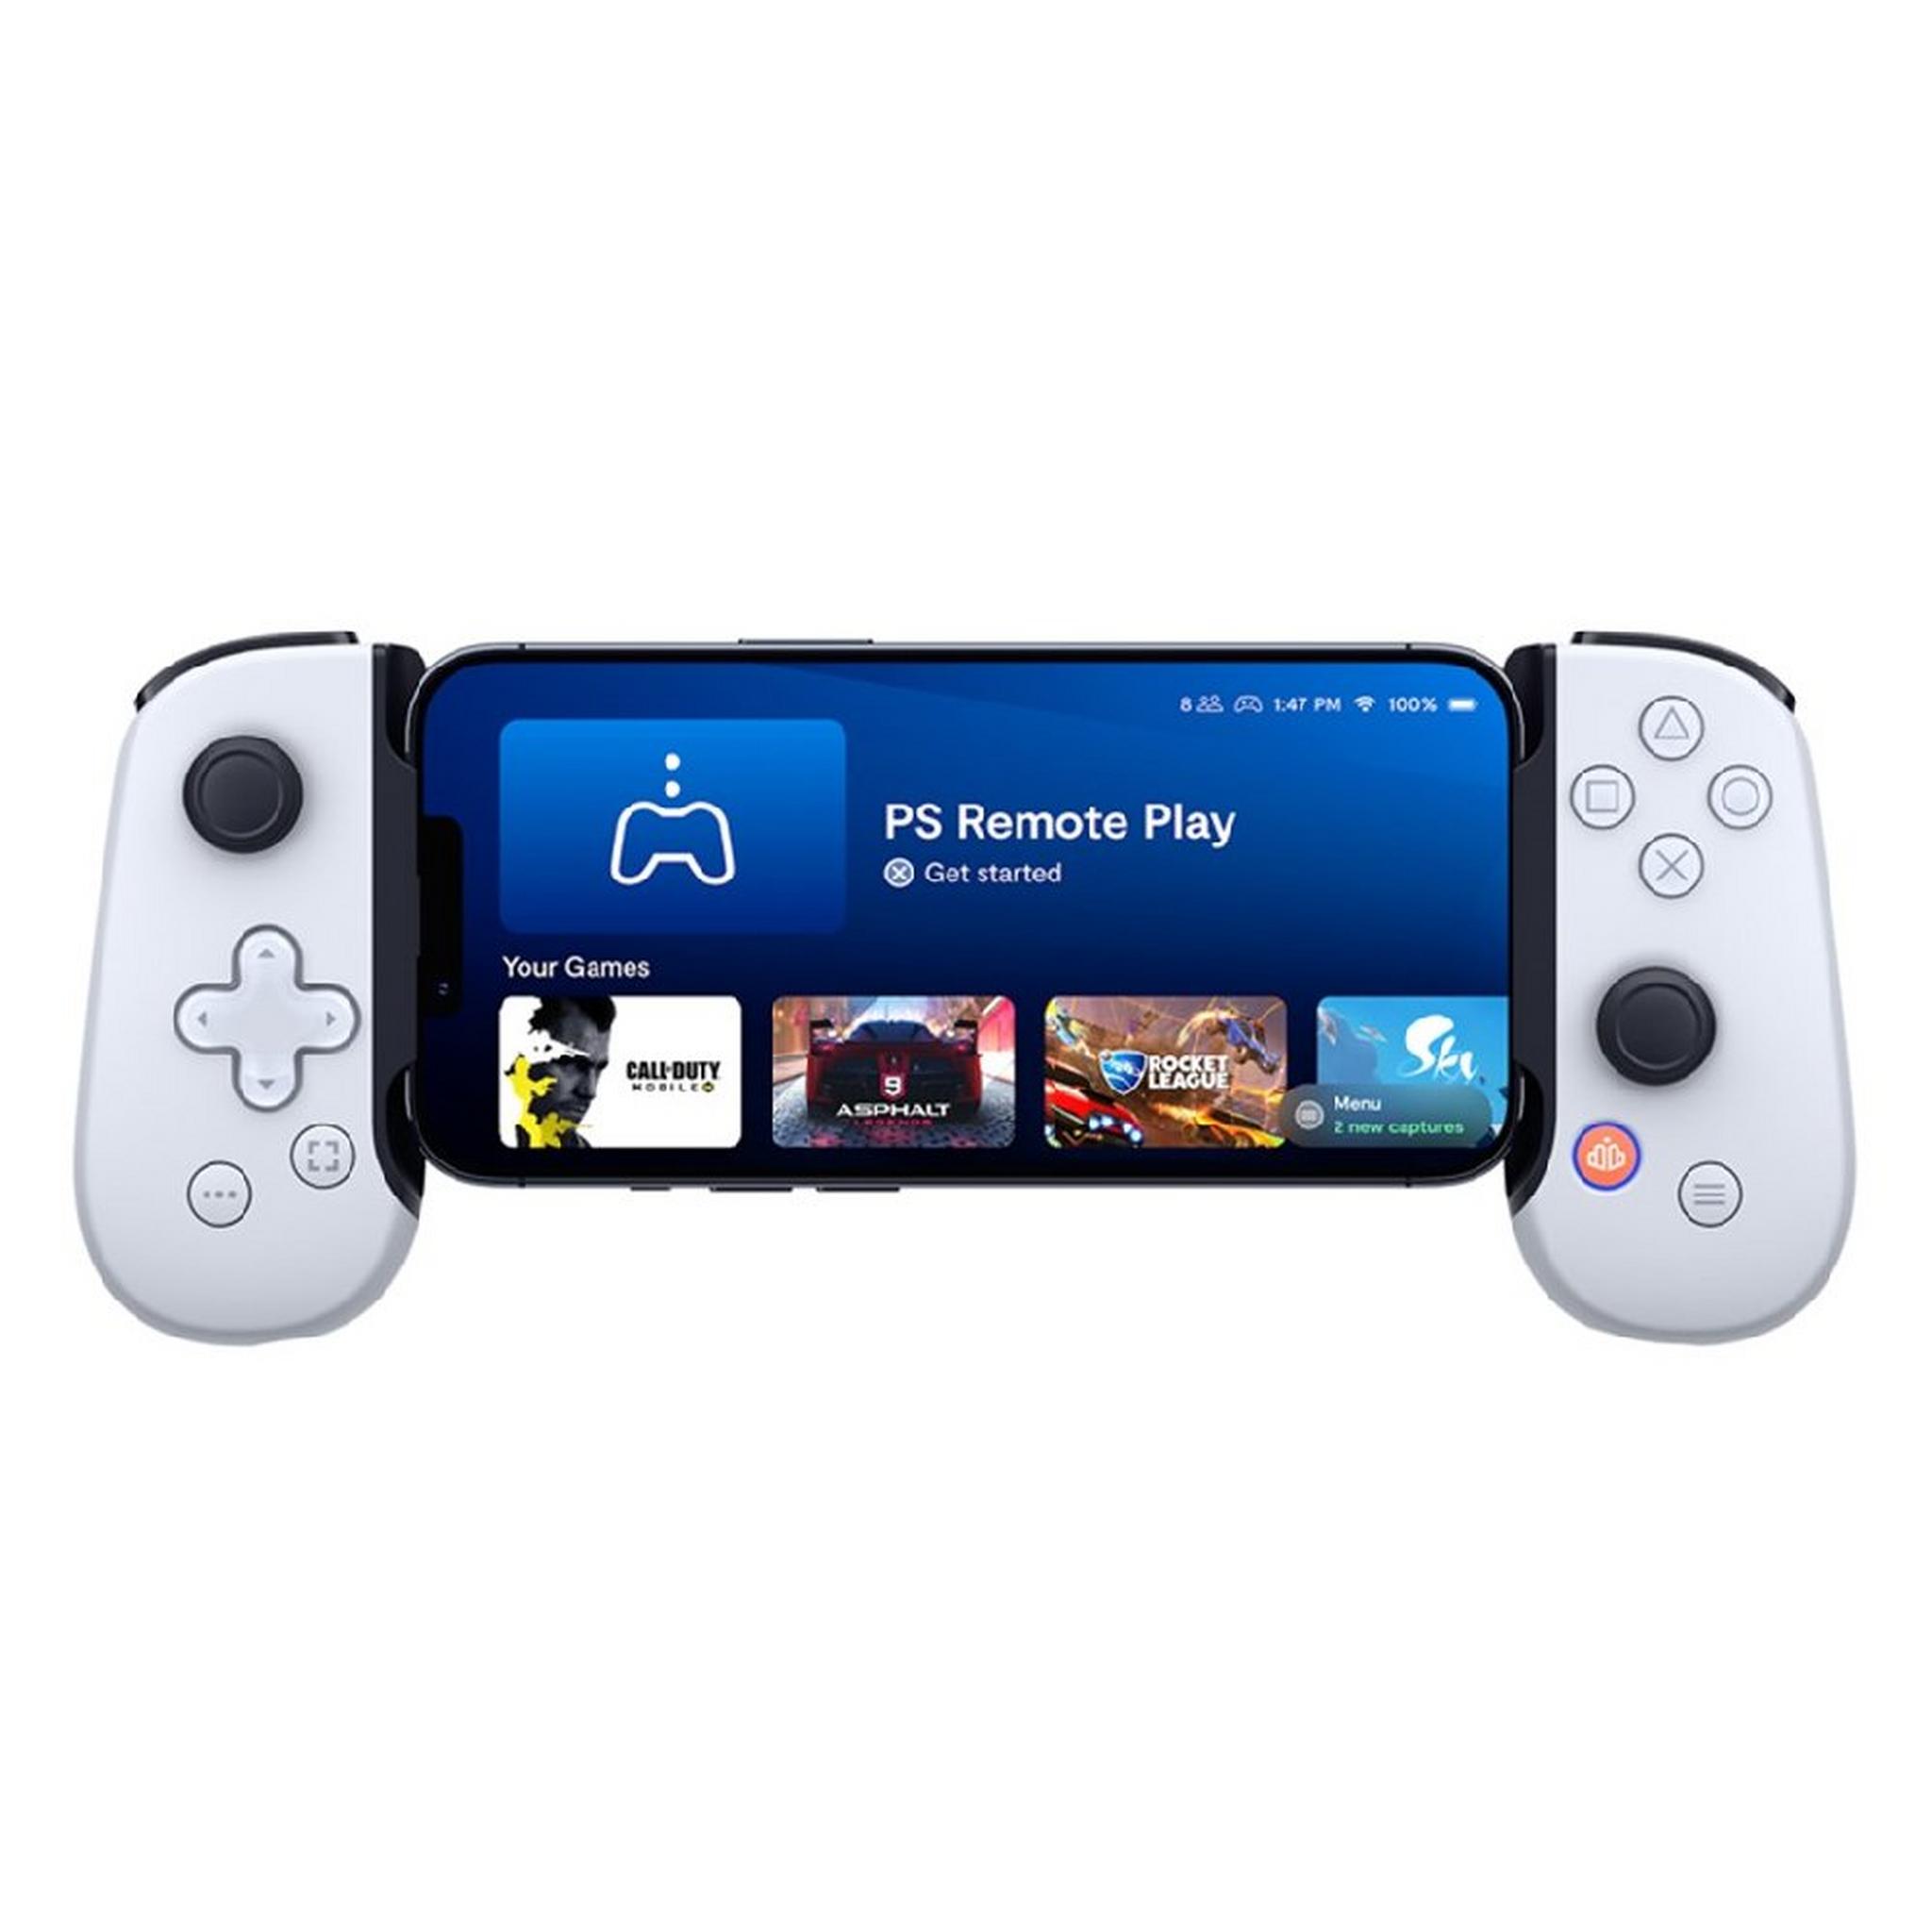 BACKBONE One Handheld iPhone Game Controller for PlayStation, BB-02-W-S – White